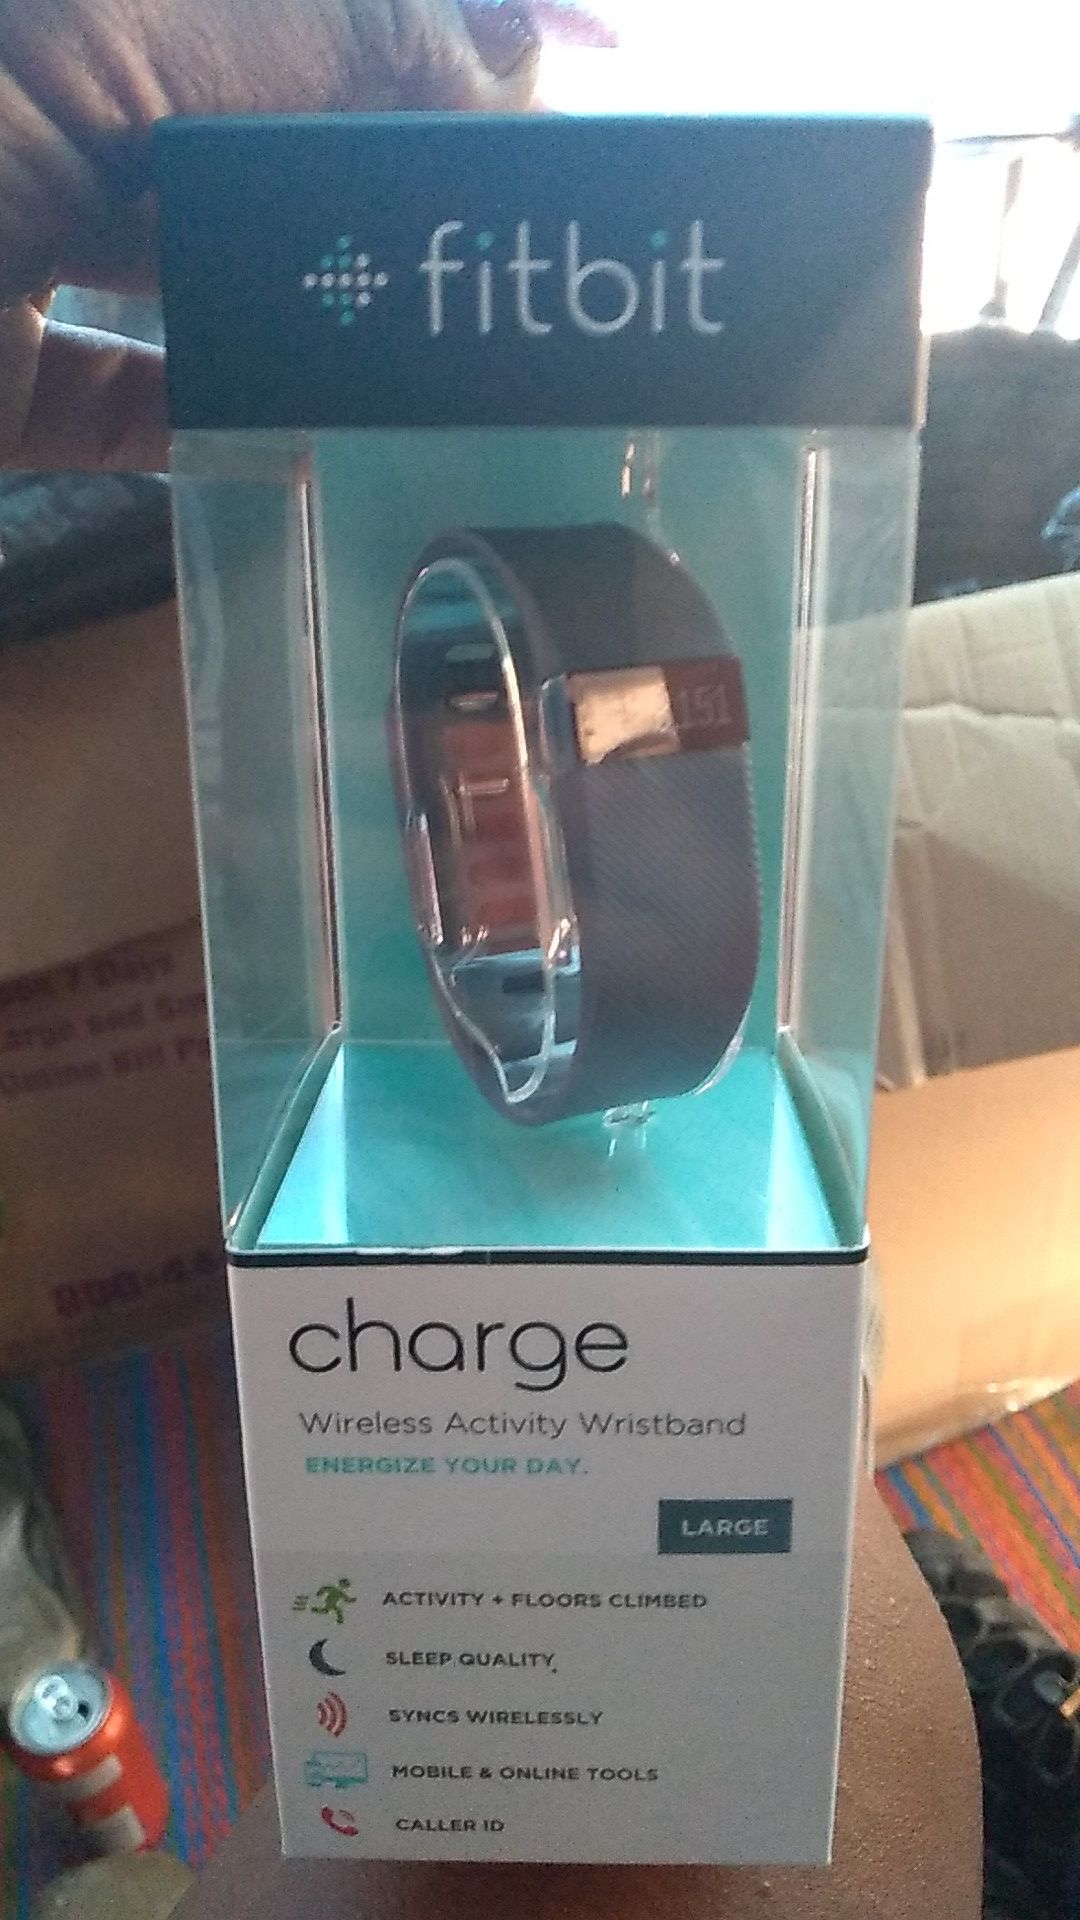 FitBit - CHARGE (Wireless Activity Wristband)